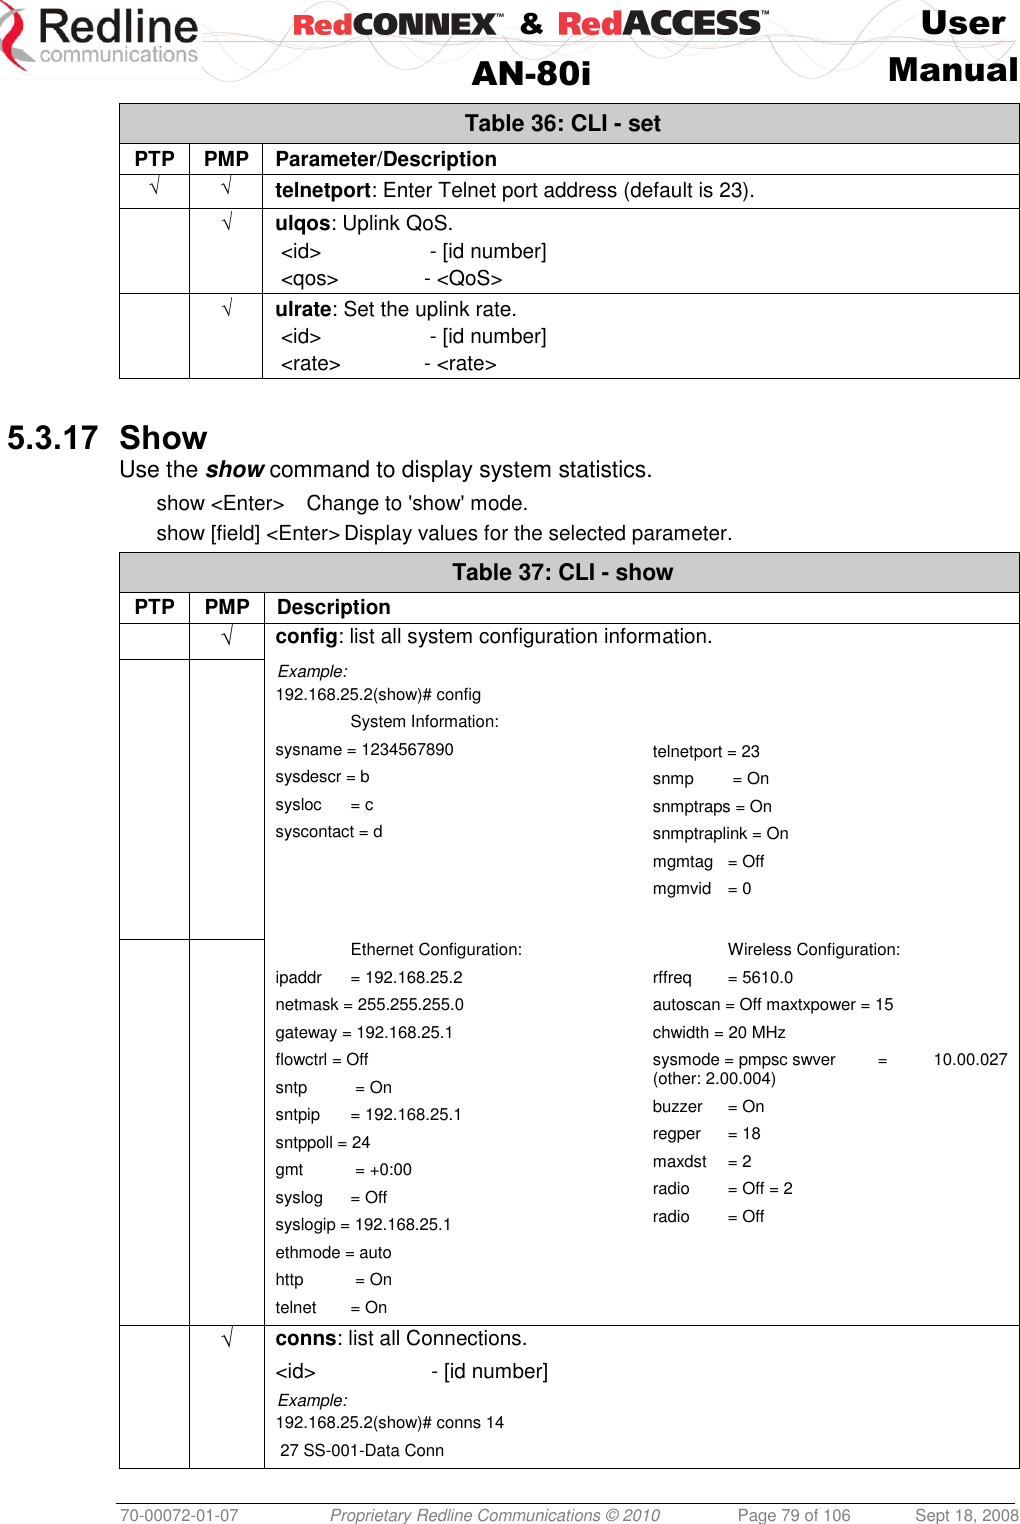    &amp;  User  AN-80i Manual  70-00072-01-07 Proprietary Redline Communications © 2010  Page 79 of 106  Sept 18, 2008 Table 36: CLI - set PTP PMP Parameter/Description √ √ telnetport: Enter Telnet port address (default is 23).   √ ulqos: Uplink QoS.  &lt;id&gt;     - [id number]  &lt;qos&gt;    - &lt;QoS&gt;  √ ulrate: Set the uplink rate.  &lt;id&gt;     - [id number]  &lt;rate&gt;   - &lt;rate&gt;  5.3.17 Show Use the show command to display system statistics. show &lt;Enter&gt;  Change to &apos;show&apos; mode. show [field] &lt;Enter&gt; Display values for the selected parameter. Table 37: CLI - show PTP PMP Description  √ config: list all system configuration information.   Example: 192.168.25.2(show)# config   System Information: sysname = 1234567890 sysdescr = b sysloc  = c syscontact = d     telnetport = 23 snmp   = On snmptraps = On snmptraplink = On mgmtag  = Off mgmvid  = 0      Ethernet Configuration: ipaddr  = 192.168.25.2 netmask = 255.255.255.0 gateway = 192.168.25.1 flowctrl = Off sntp   = On sntpip  = 192.168.25.1 sntppoll = 24 gmt   = +0:00 syslog  = Off  syslogip = 192.168.25.1 ethmode = auto http   = On telnet  = On   Wireless Configuration: rffreq  = 5610.0 autoscan = Off maxtxpower = 15 chwidth = 20 MHz sysmode = pmpsc swver  =  10.00.027 (other: 2.00.004) buzzer  = On regper  = 18 maxdst  = 2 radio  = Off = 2 radio  = Off  √ conns: list all Connections. &lt;id&gt;     - [id number] Example: 192.168.25.2(show)# conns 14  27 SS-001-Data Conn 